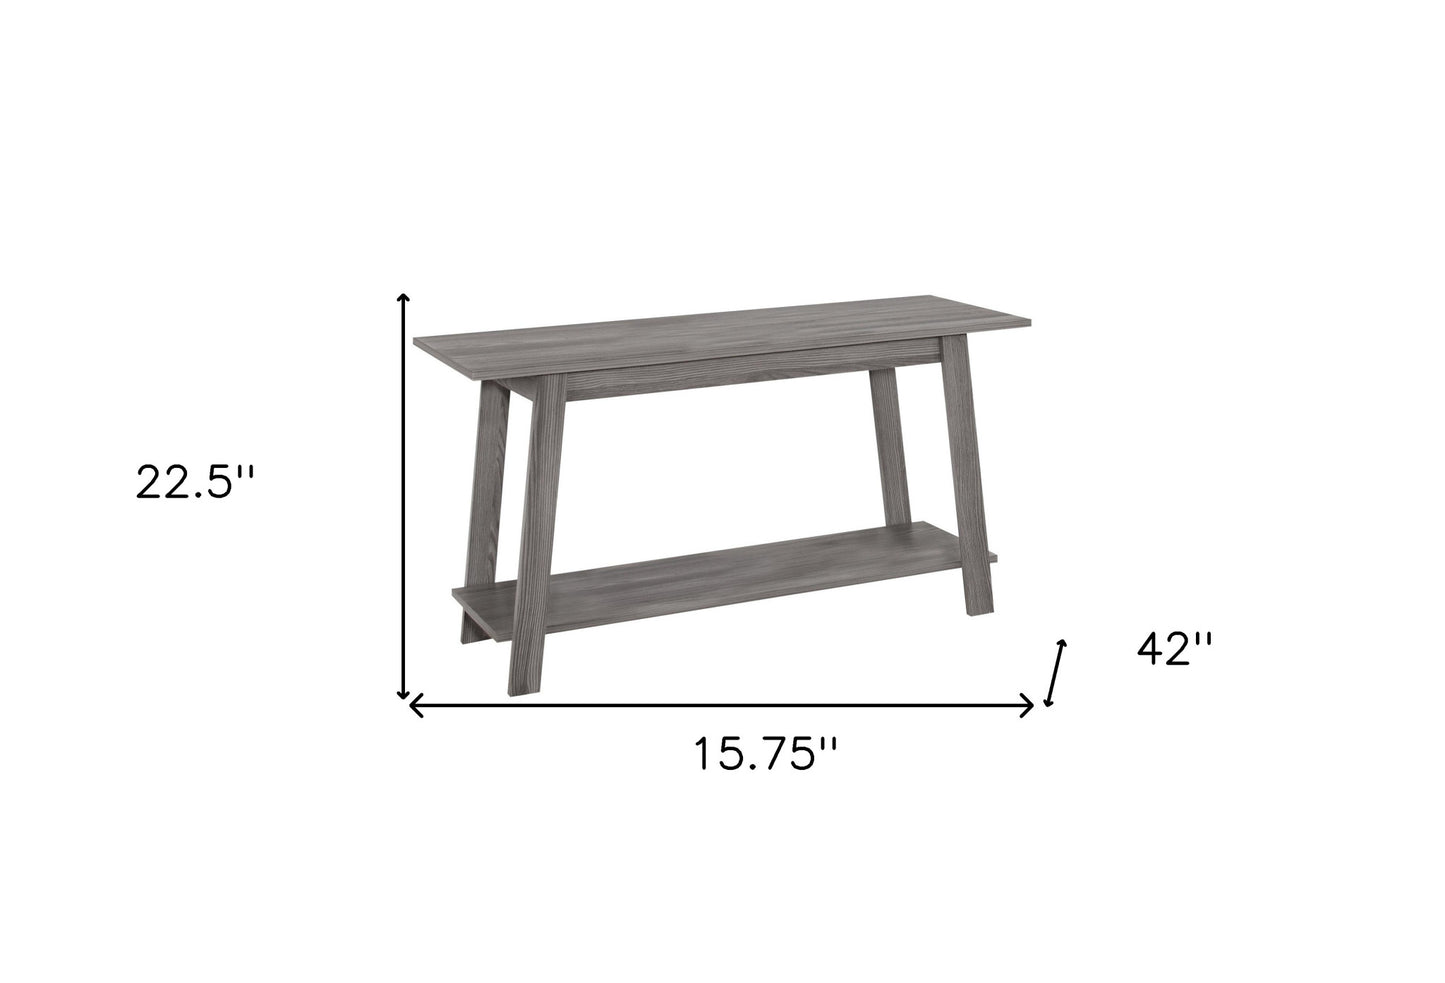 15.75" X 42" X 22.5" Dark Taupe Particle Board Laminate TV Stand